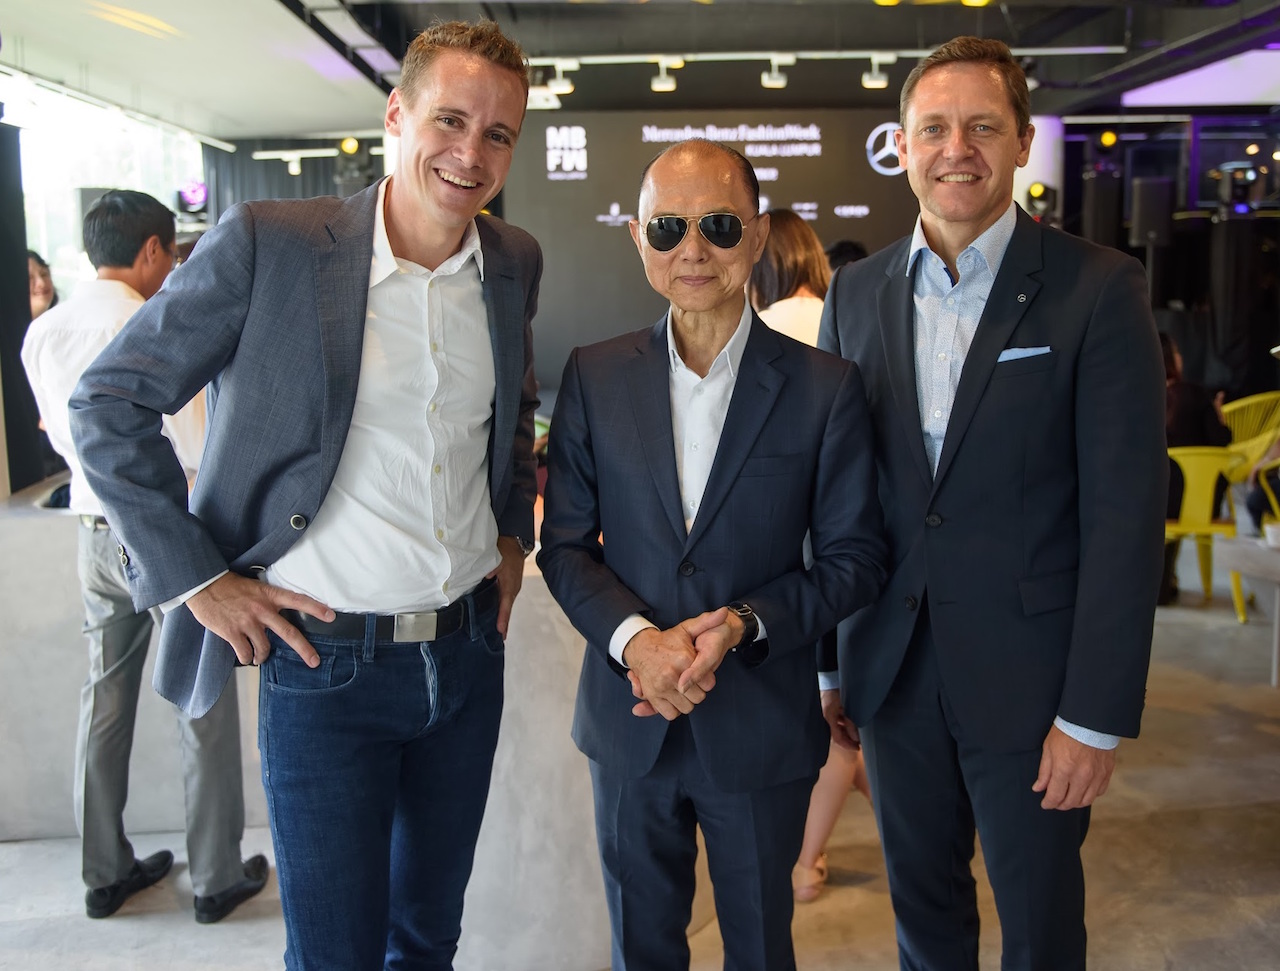 Mercedes-Benz Malaysia management and honorable guest Datuk Jimmy Choo (fourthe from left) along with the marketing partners at the Mercedes-Benz Fashion Week KL Press Conference, surrounding the stunning Mercedes-Benz C-Class Cabriolet.